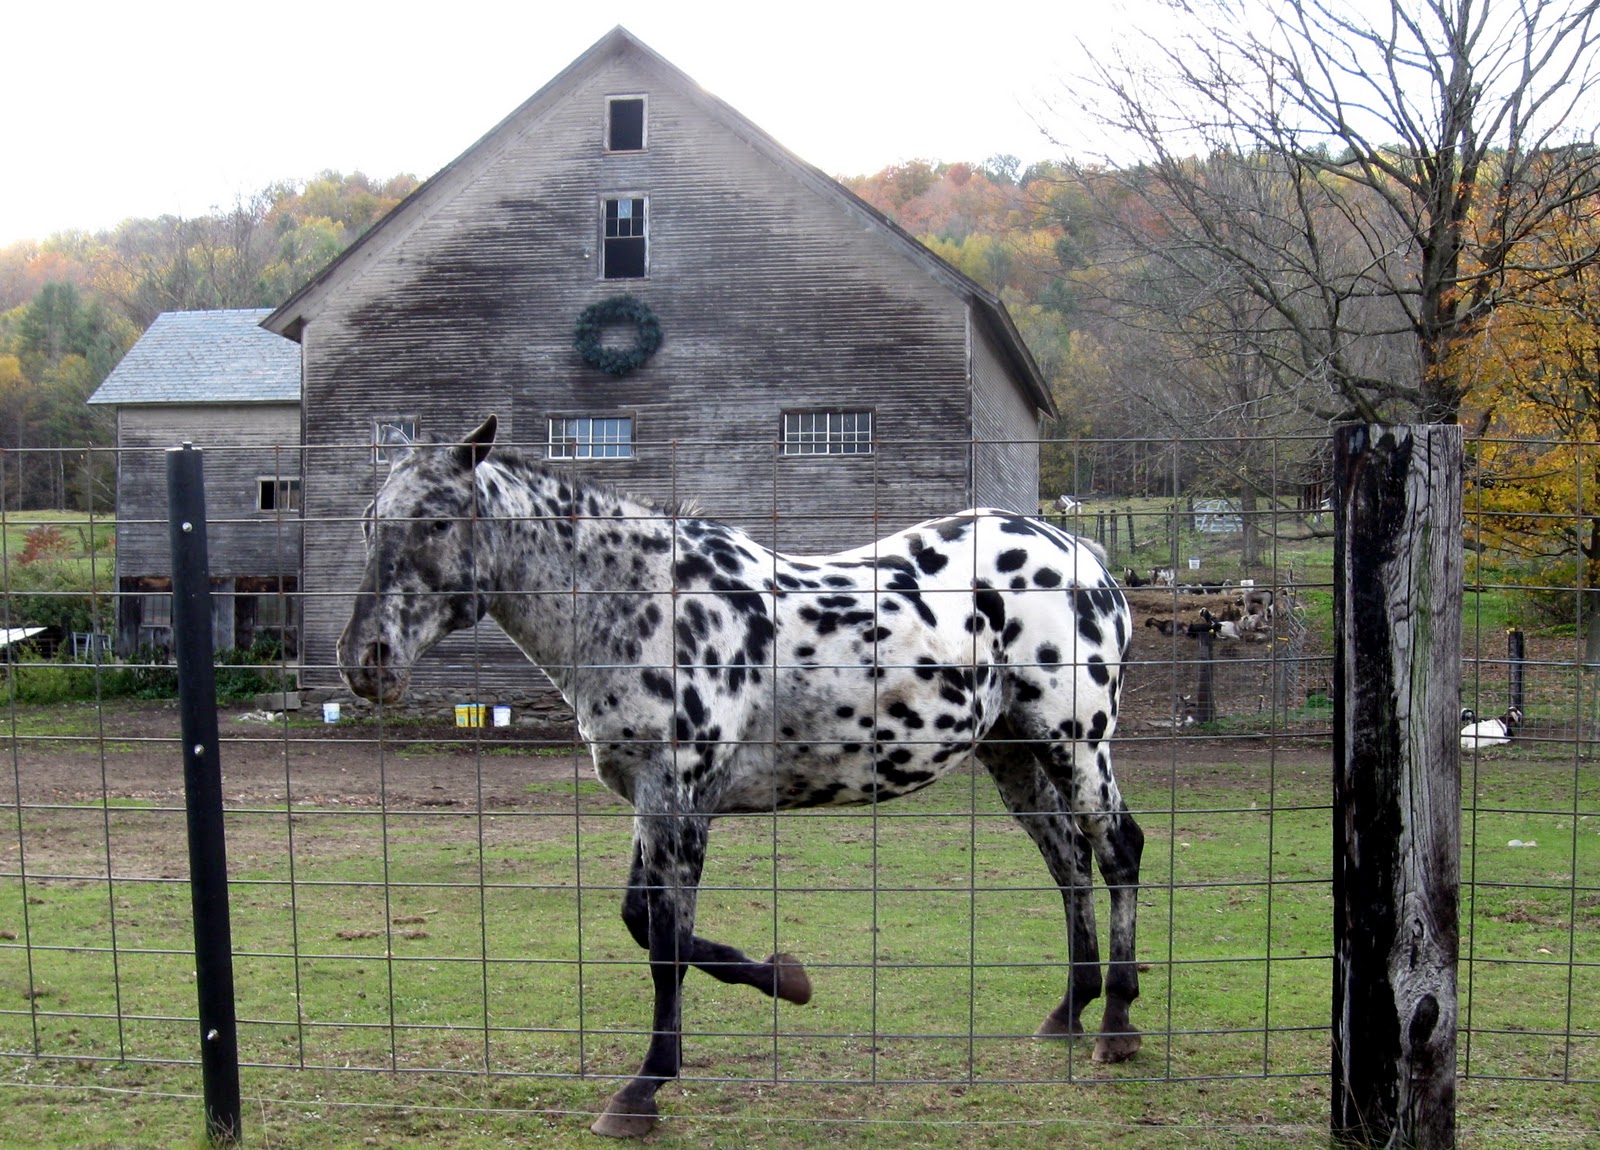 Sherry S Rustique Gallery On Polka Dotted Horses And Speckled Trees